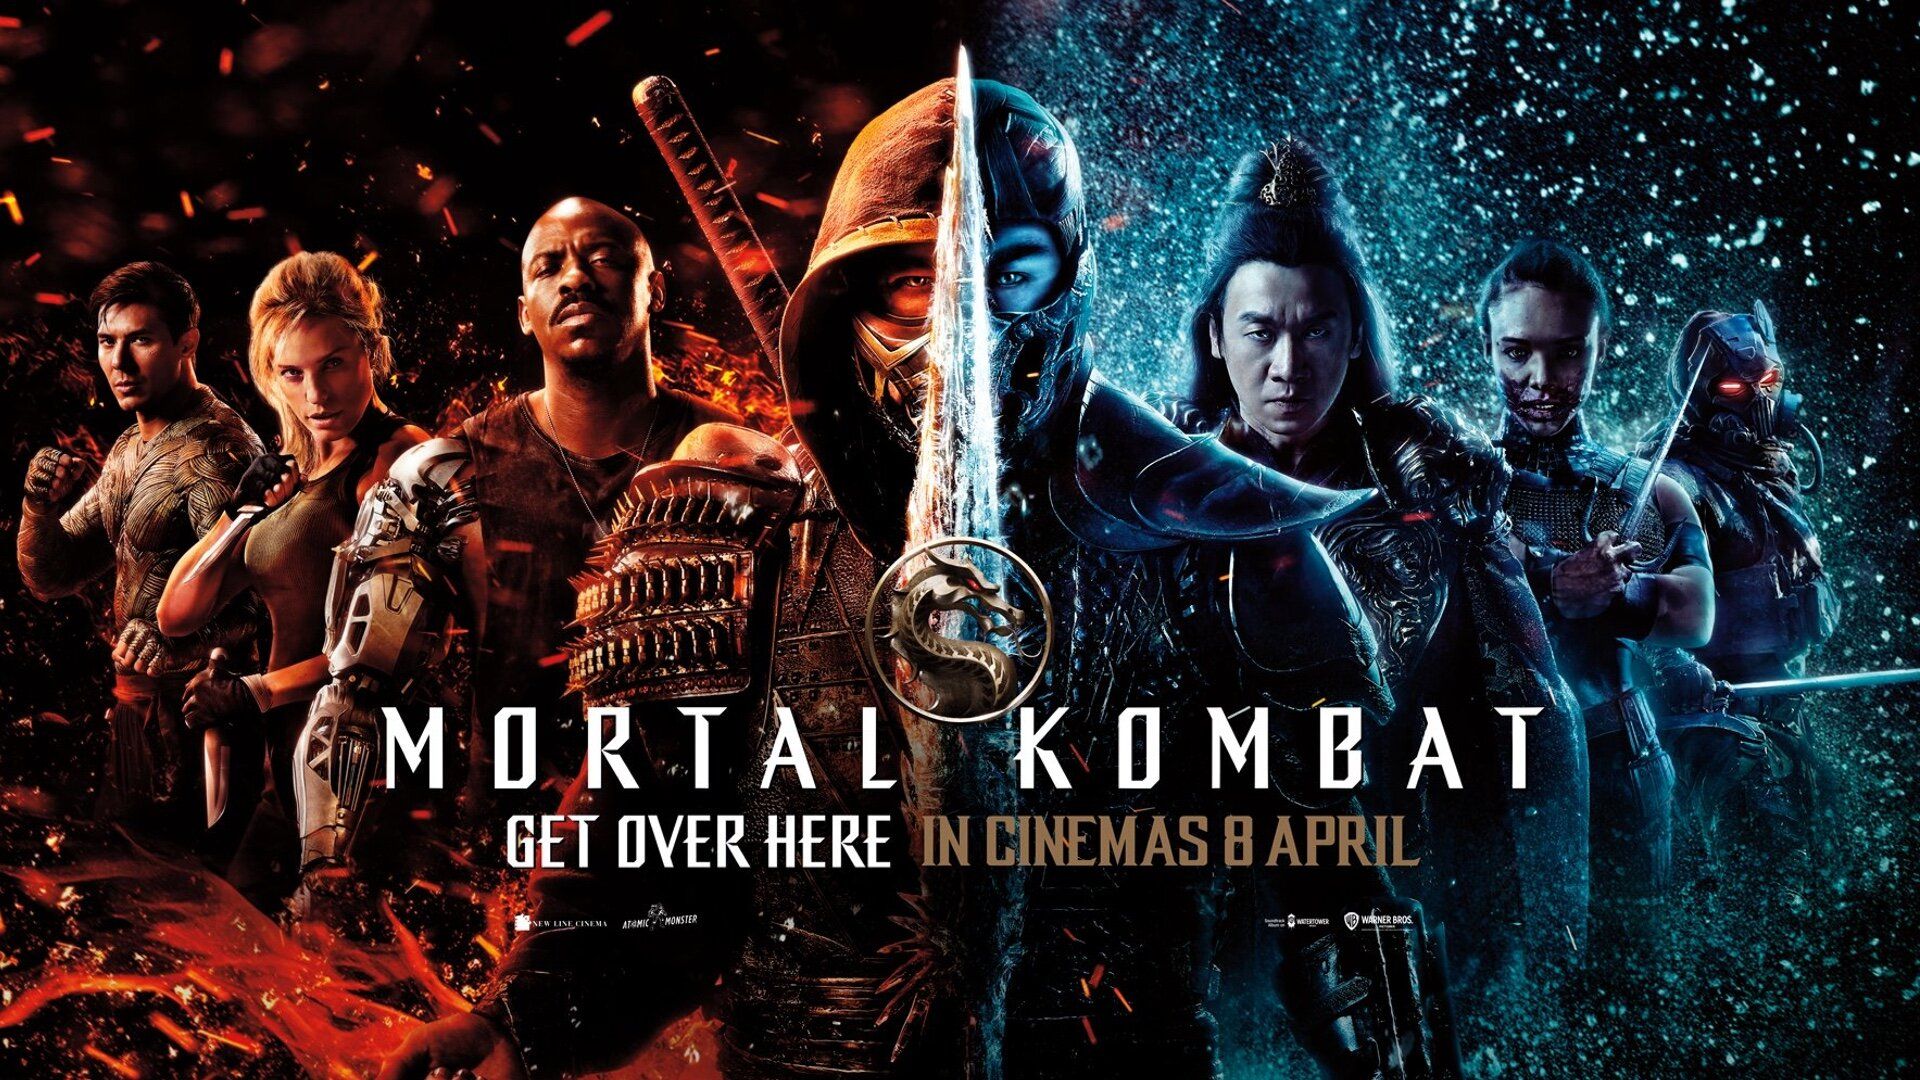 Exciting, Action Packed New TV Spots Released For MORTAL KOMBAT